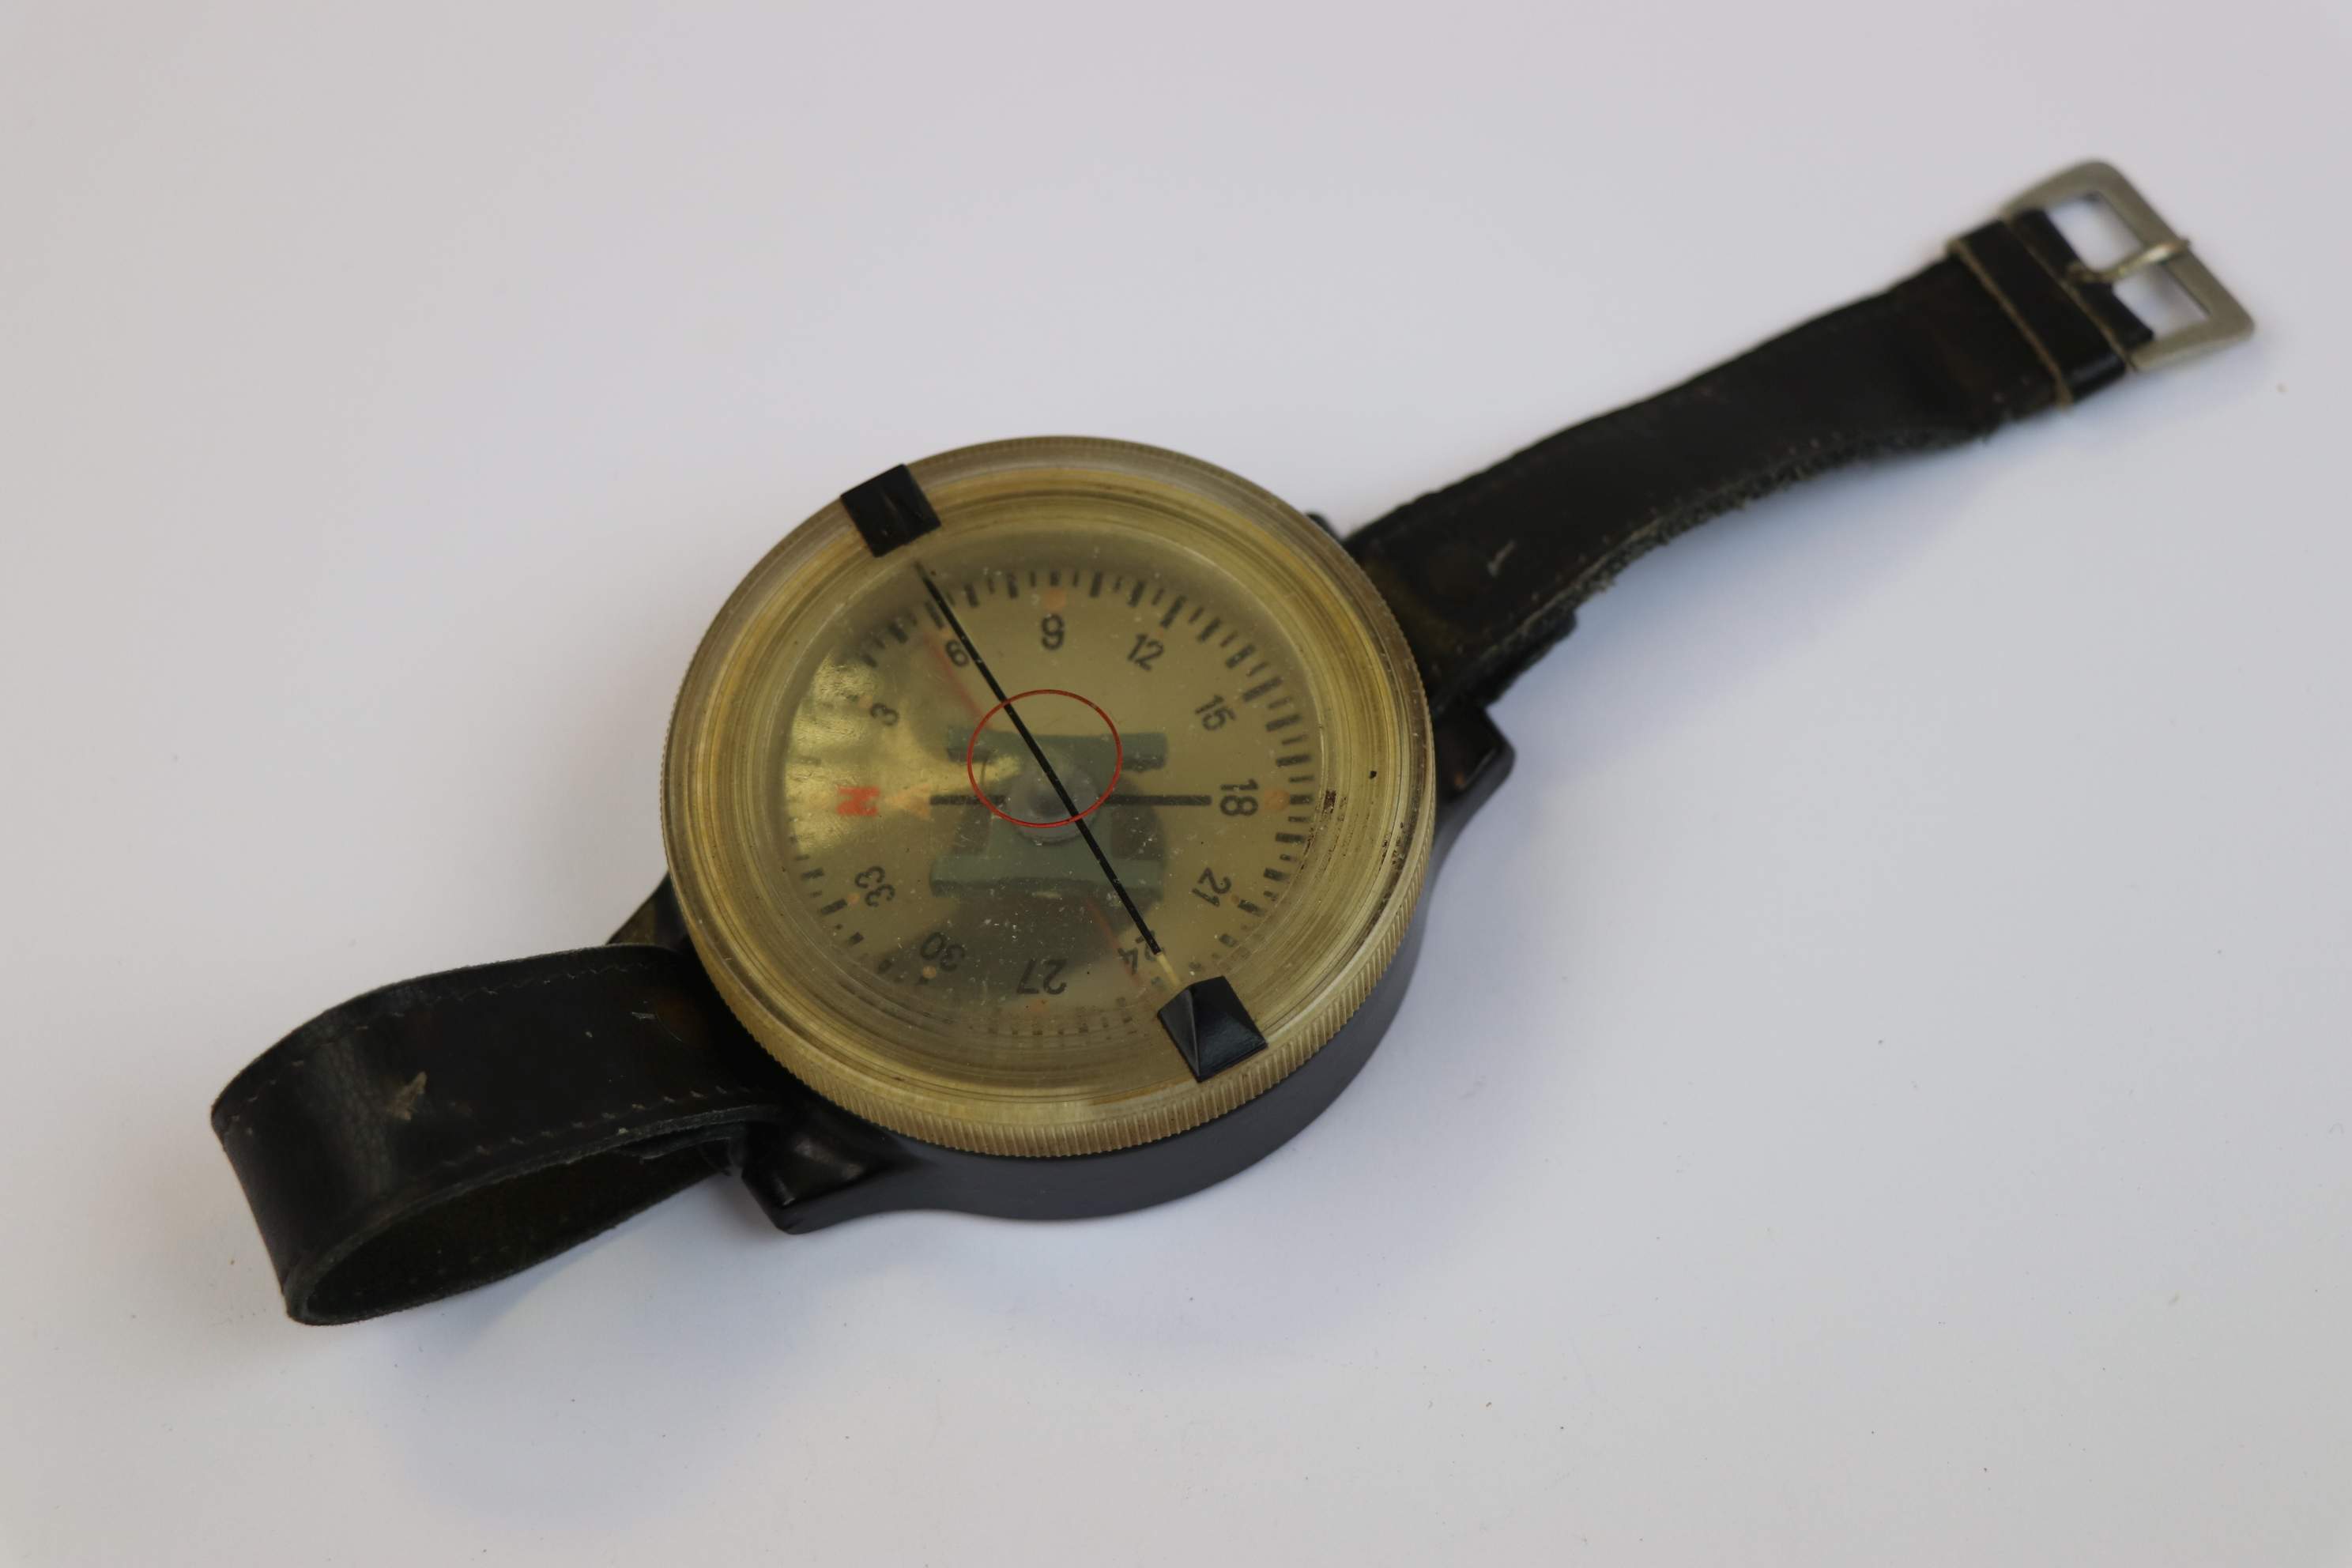 A WW2 German Luftwaffe Wrist Compass With Leather Strap, Markings To The Rear AK 39 FL 23235-1.